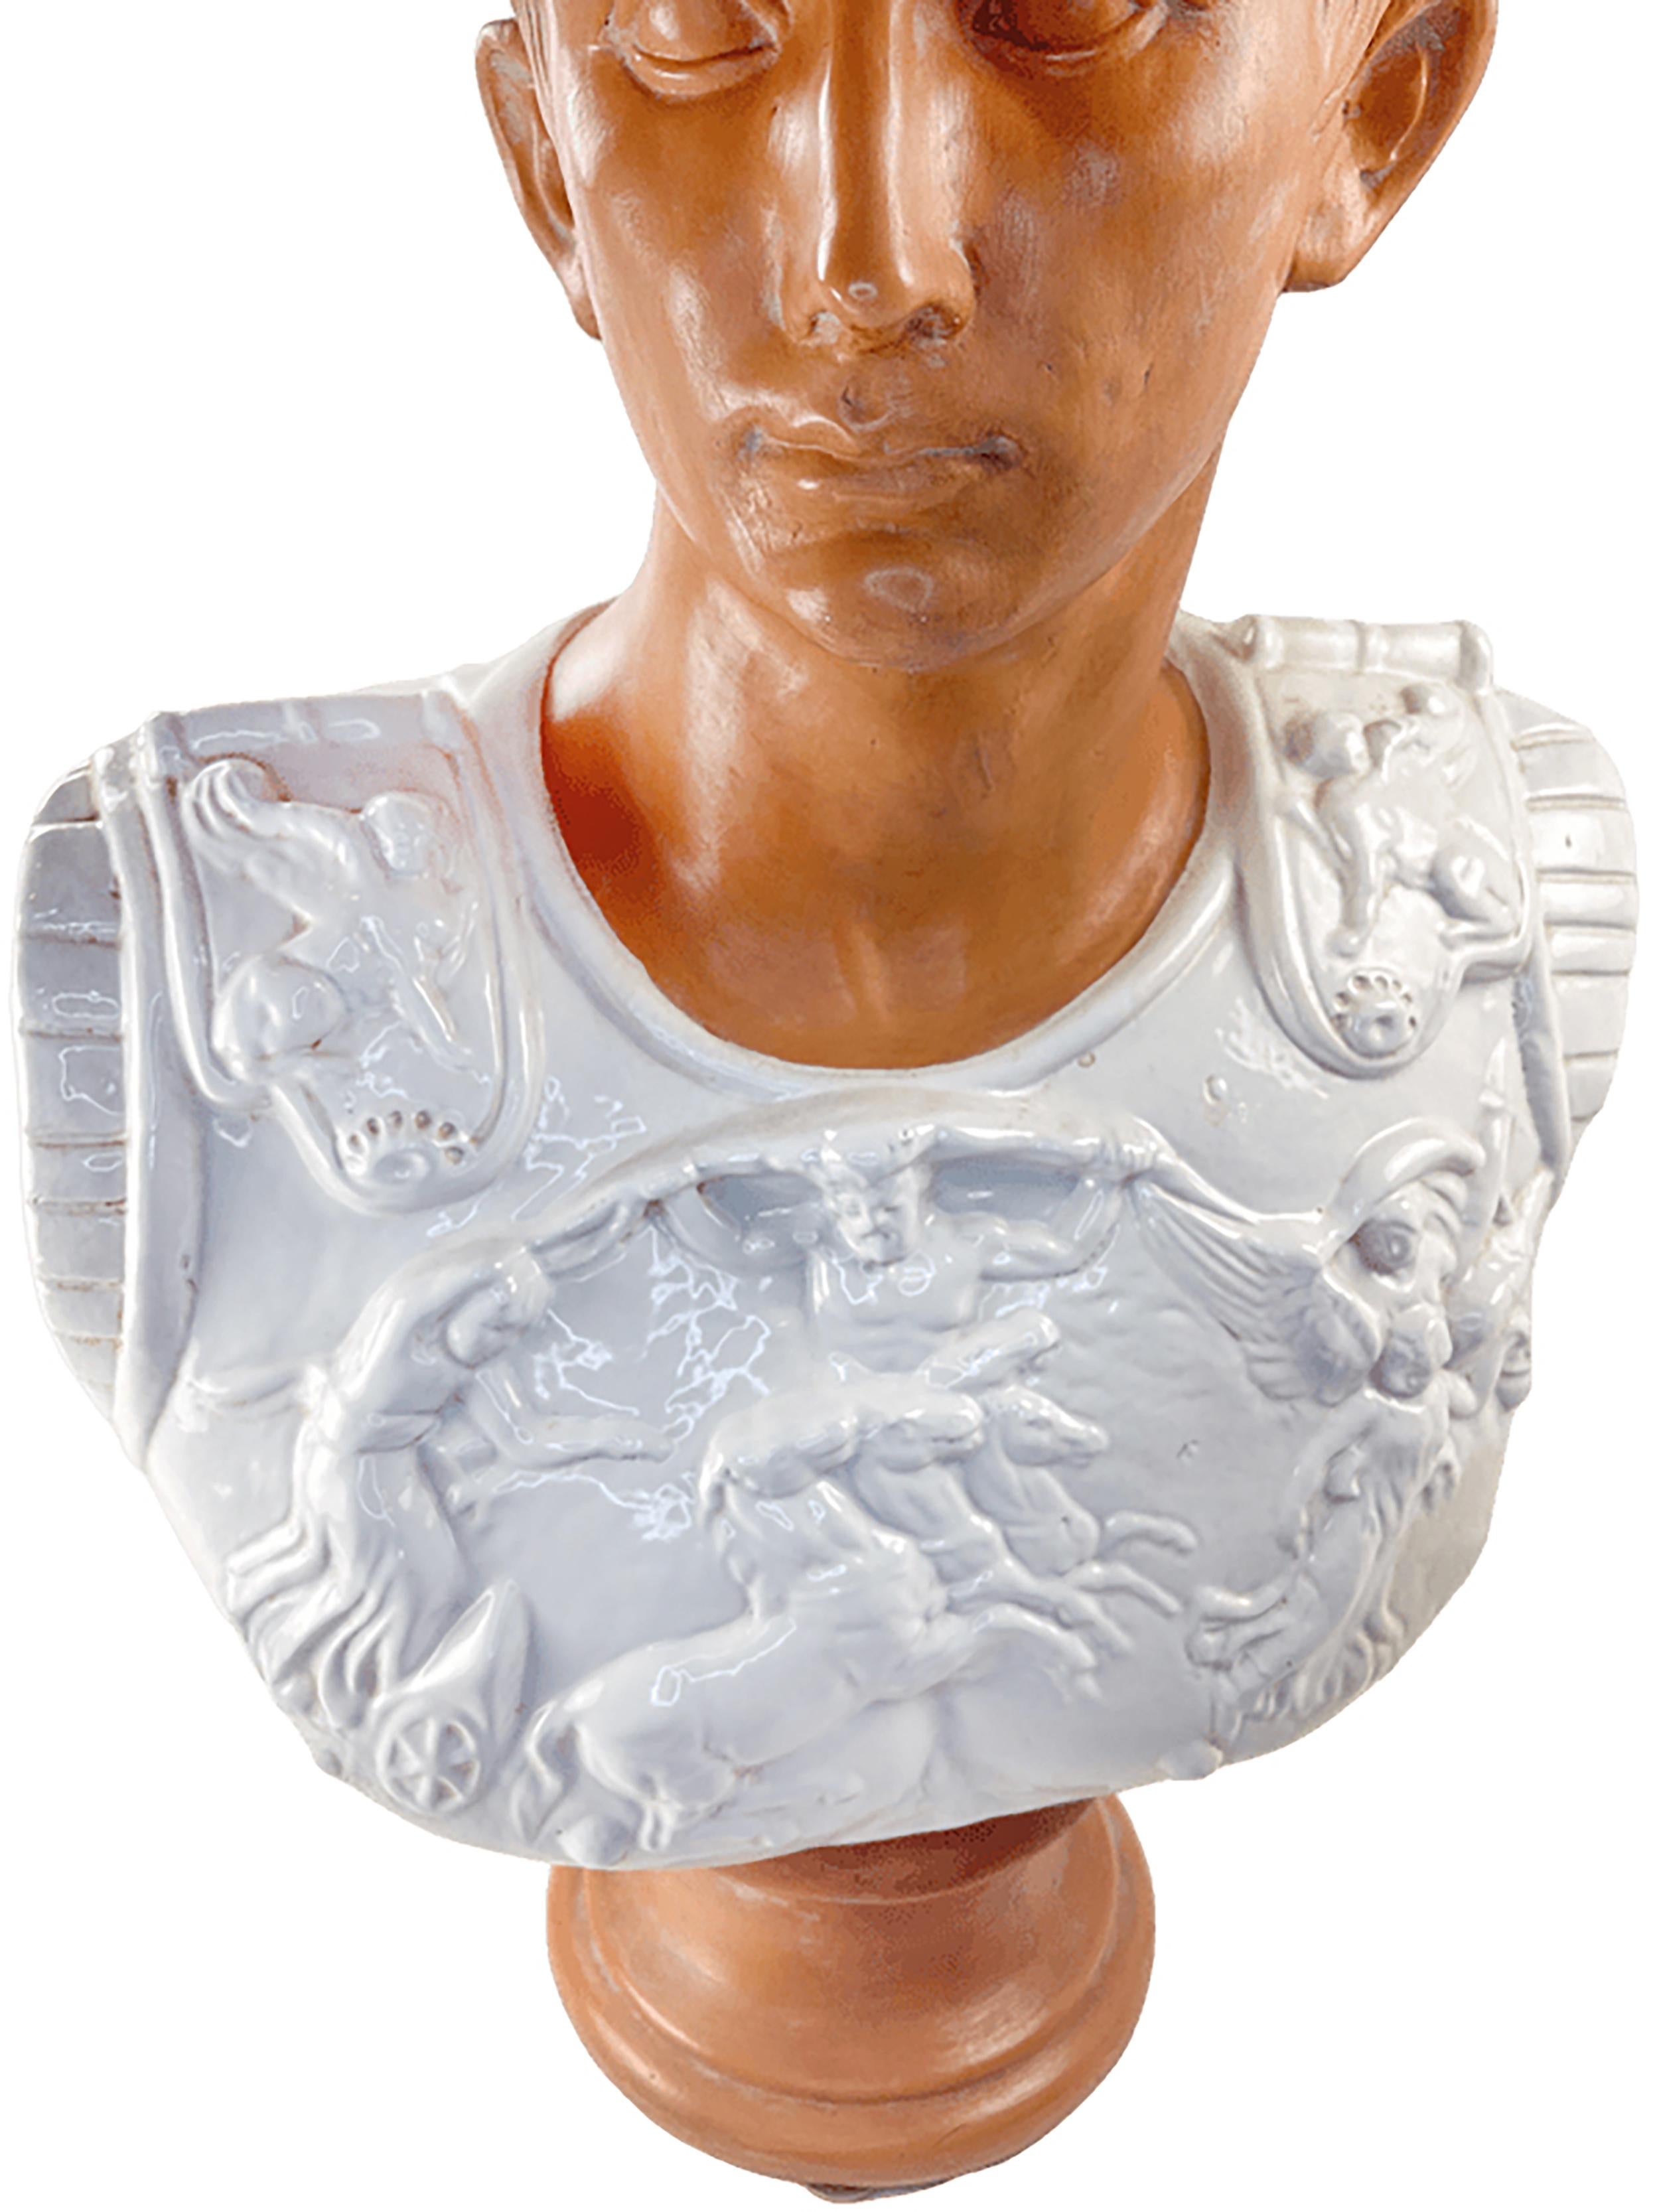 Italian Modern Bust of a Roman Soldier For Sale